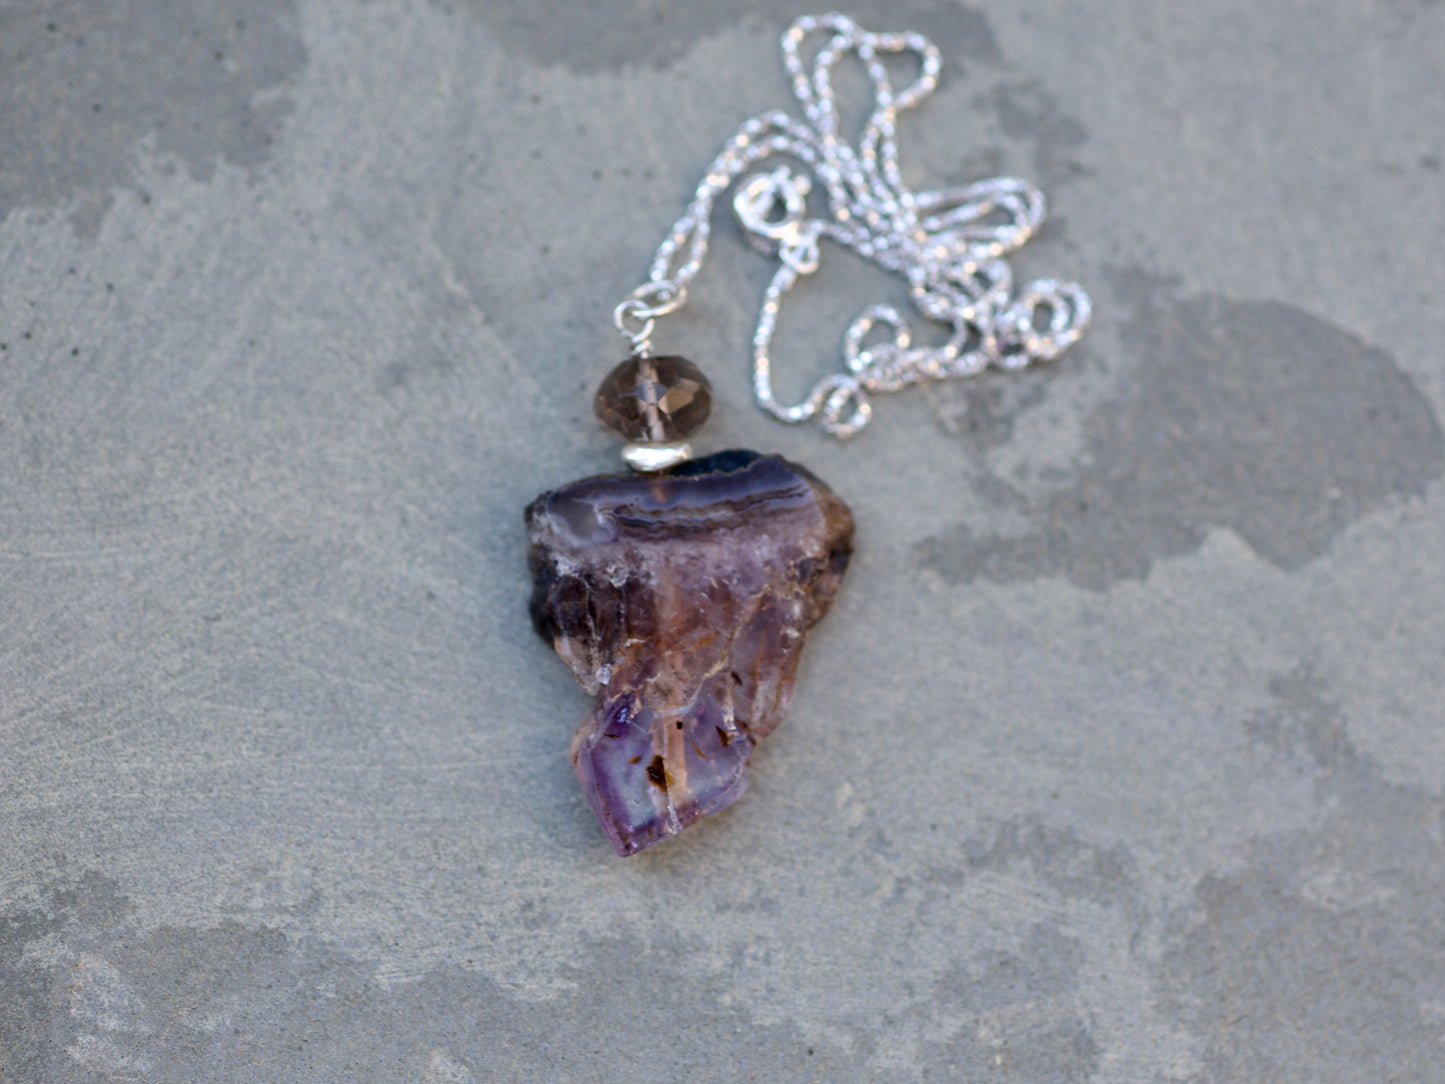 Polished Amethyst Slice, Smoky Quartz, Thai and Sterling Silver Pendant Necklace